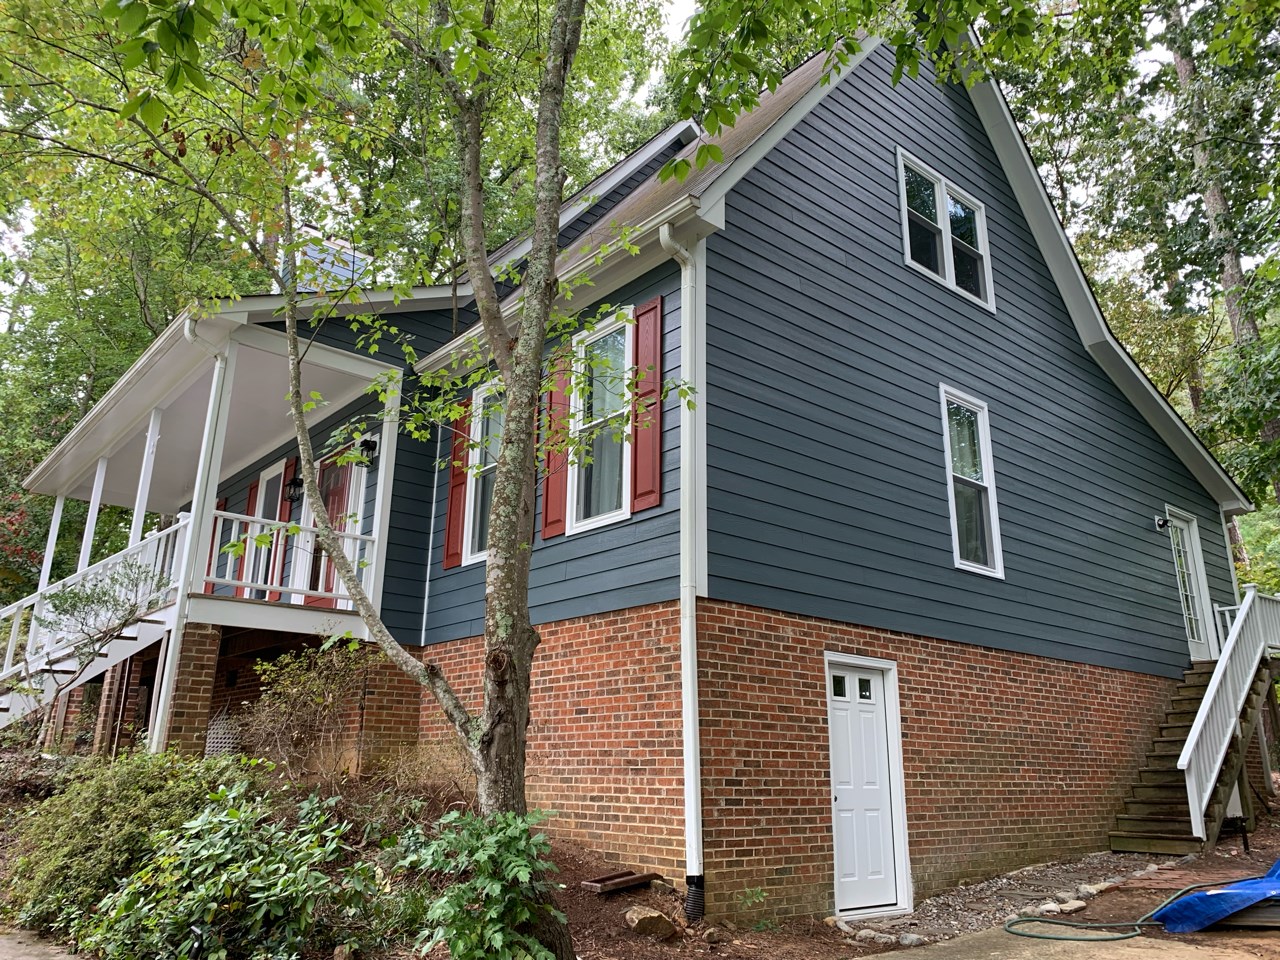 Siding repair for a home in the research triangle of north carolina